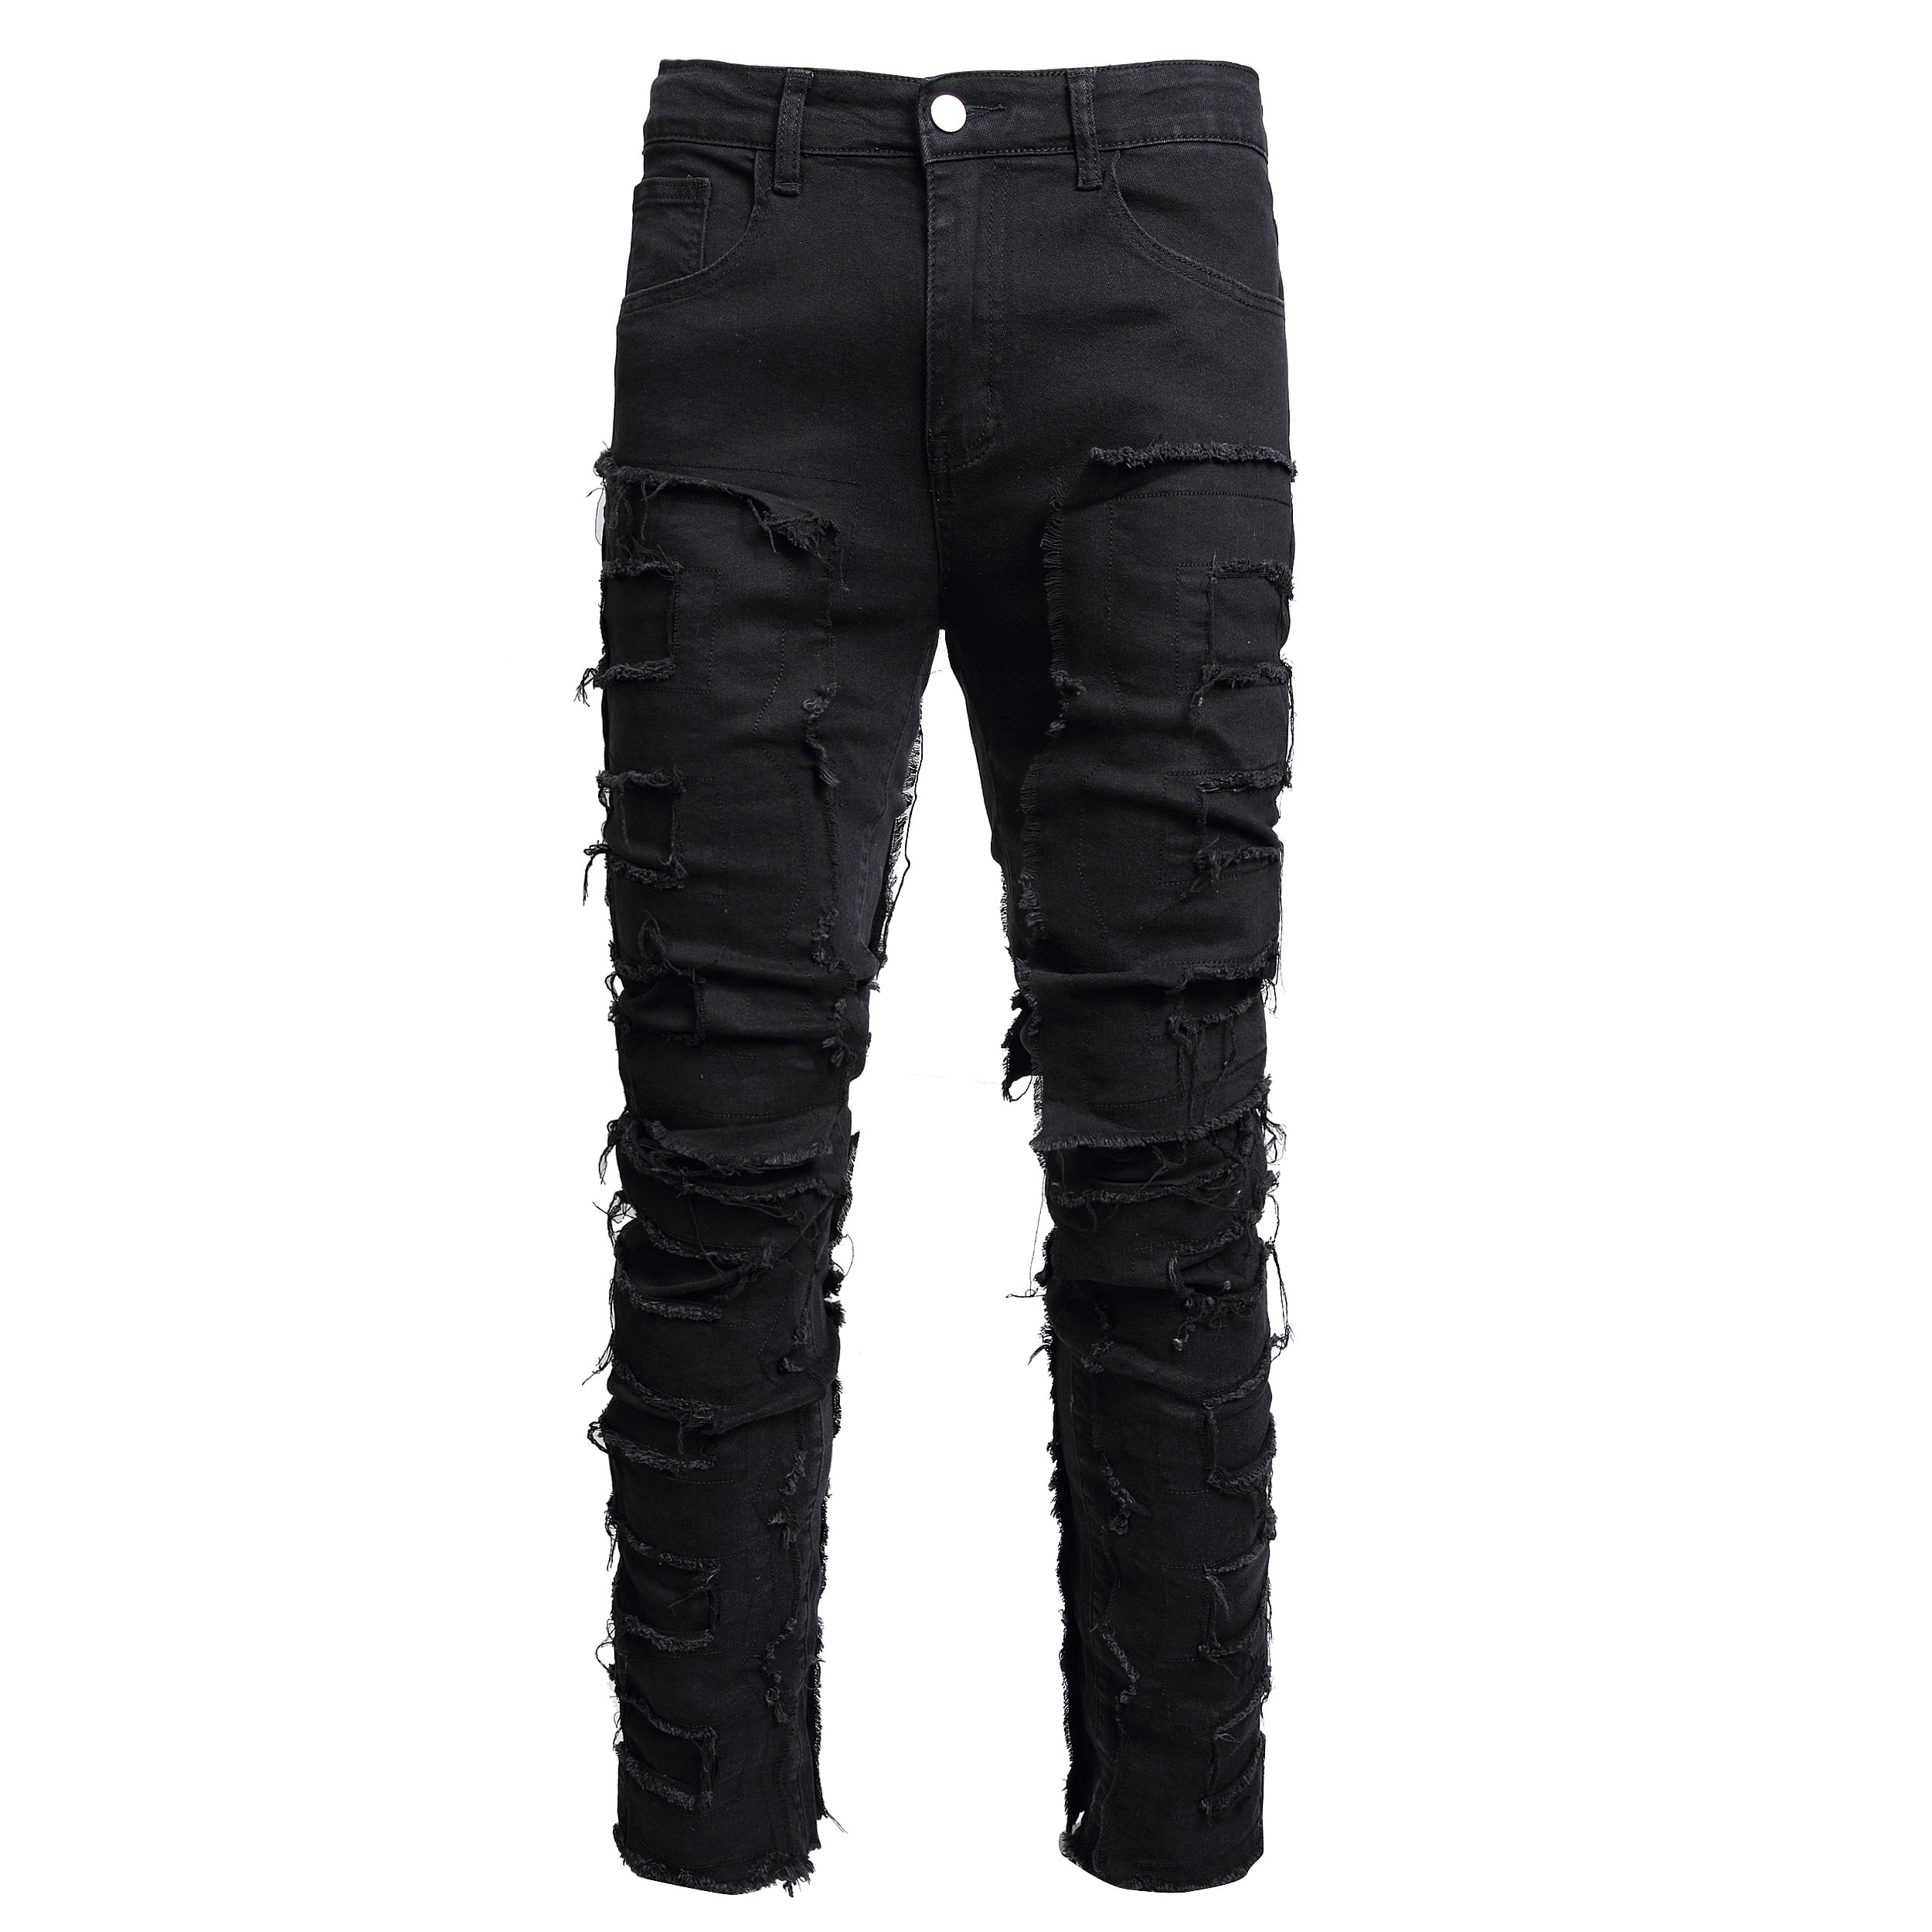 HAOMEILI Skinny Jeans for Men Stretch Slim Fit Ripped Distressed ...